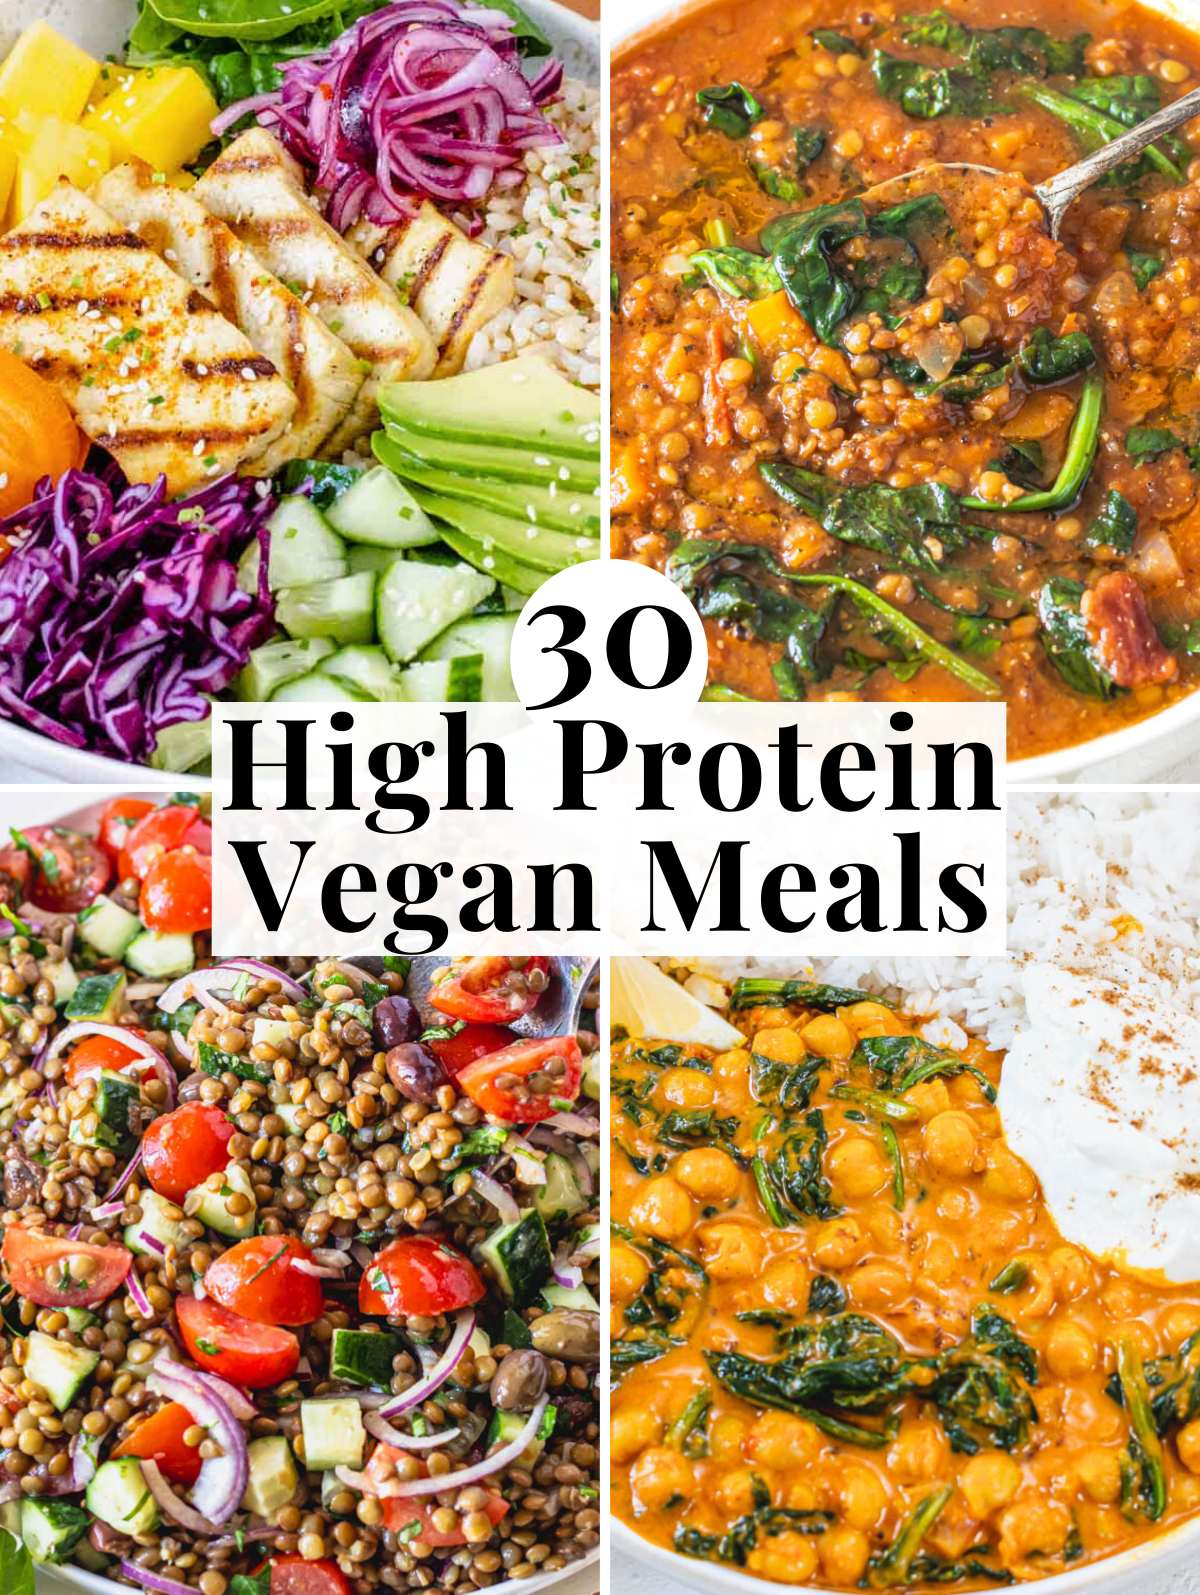 High protein vegan meals with lunch and dinner ideas